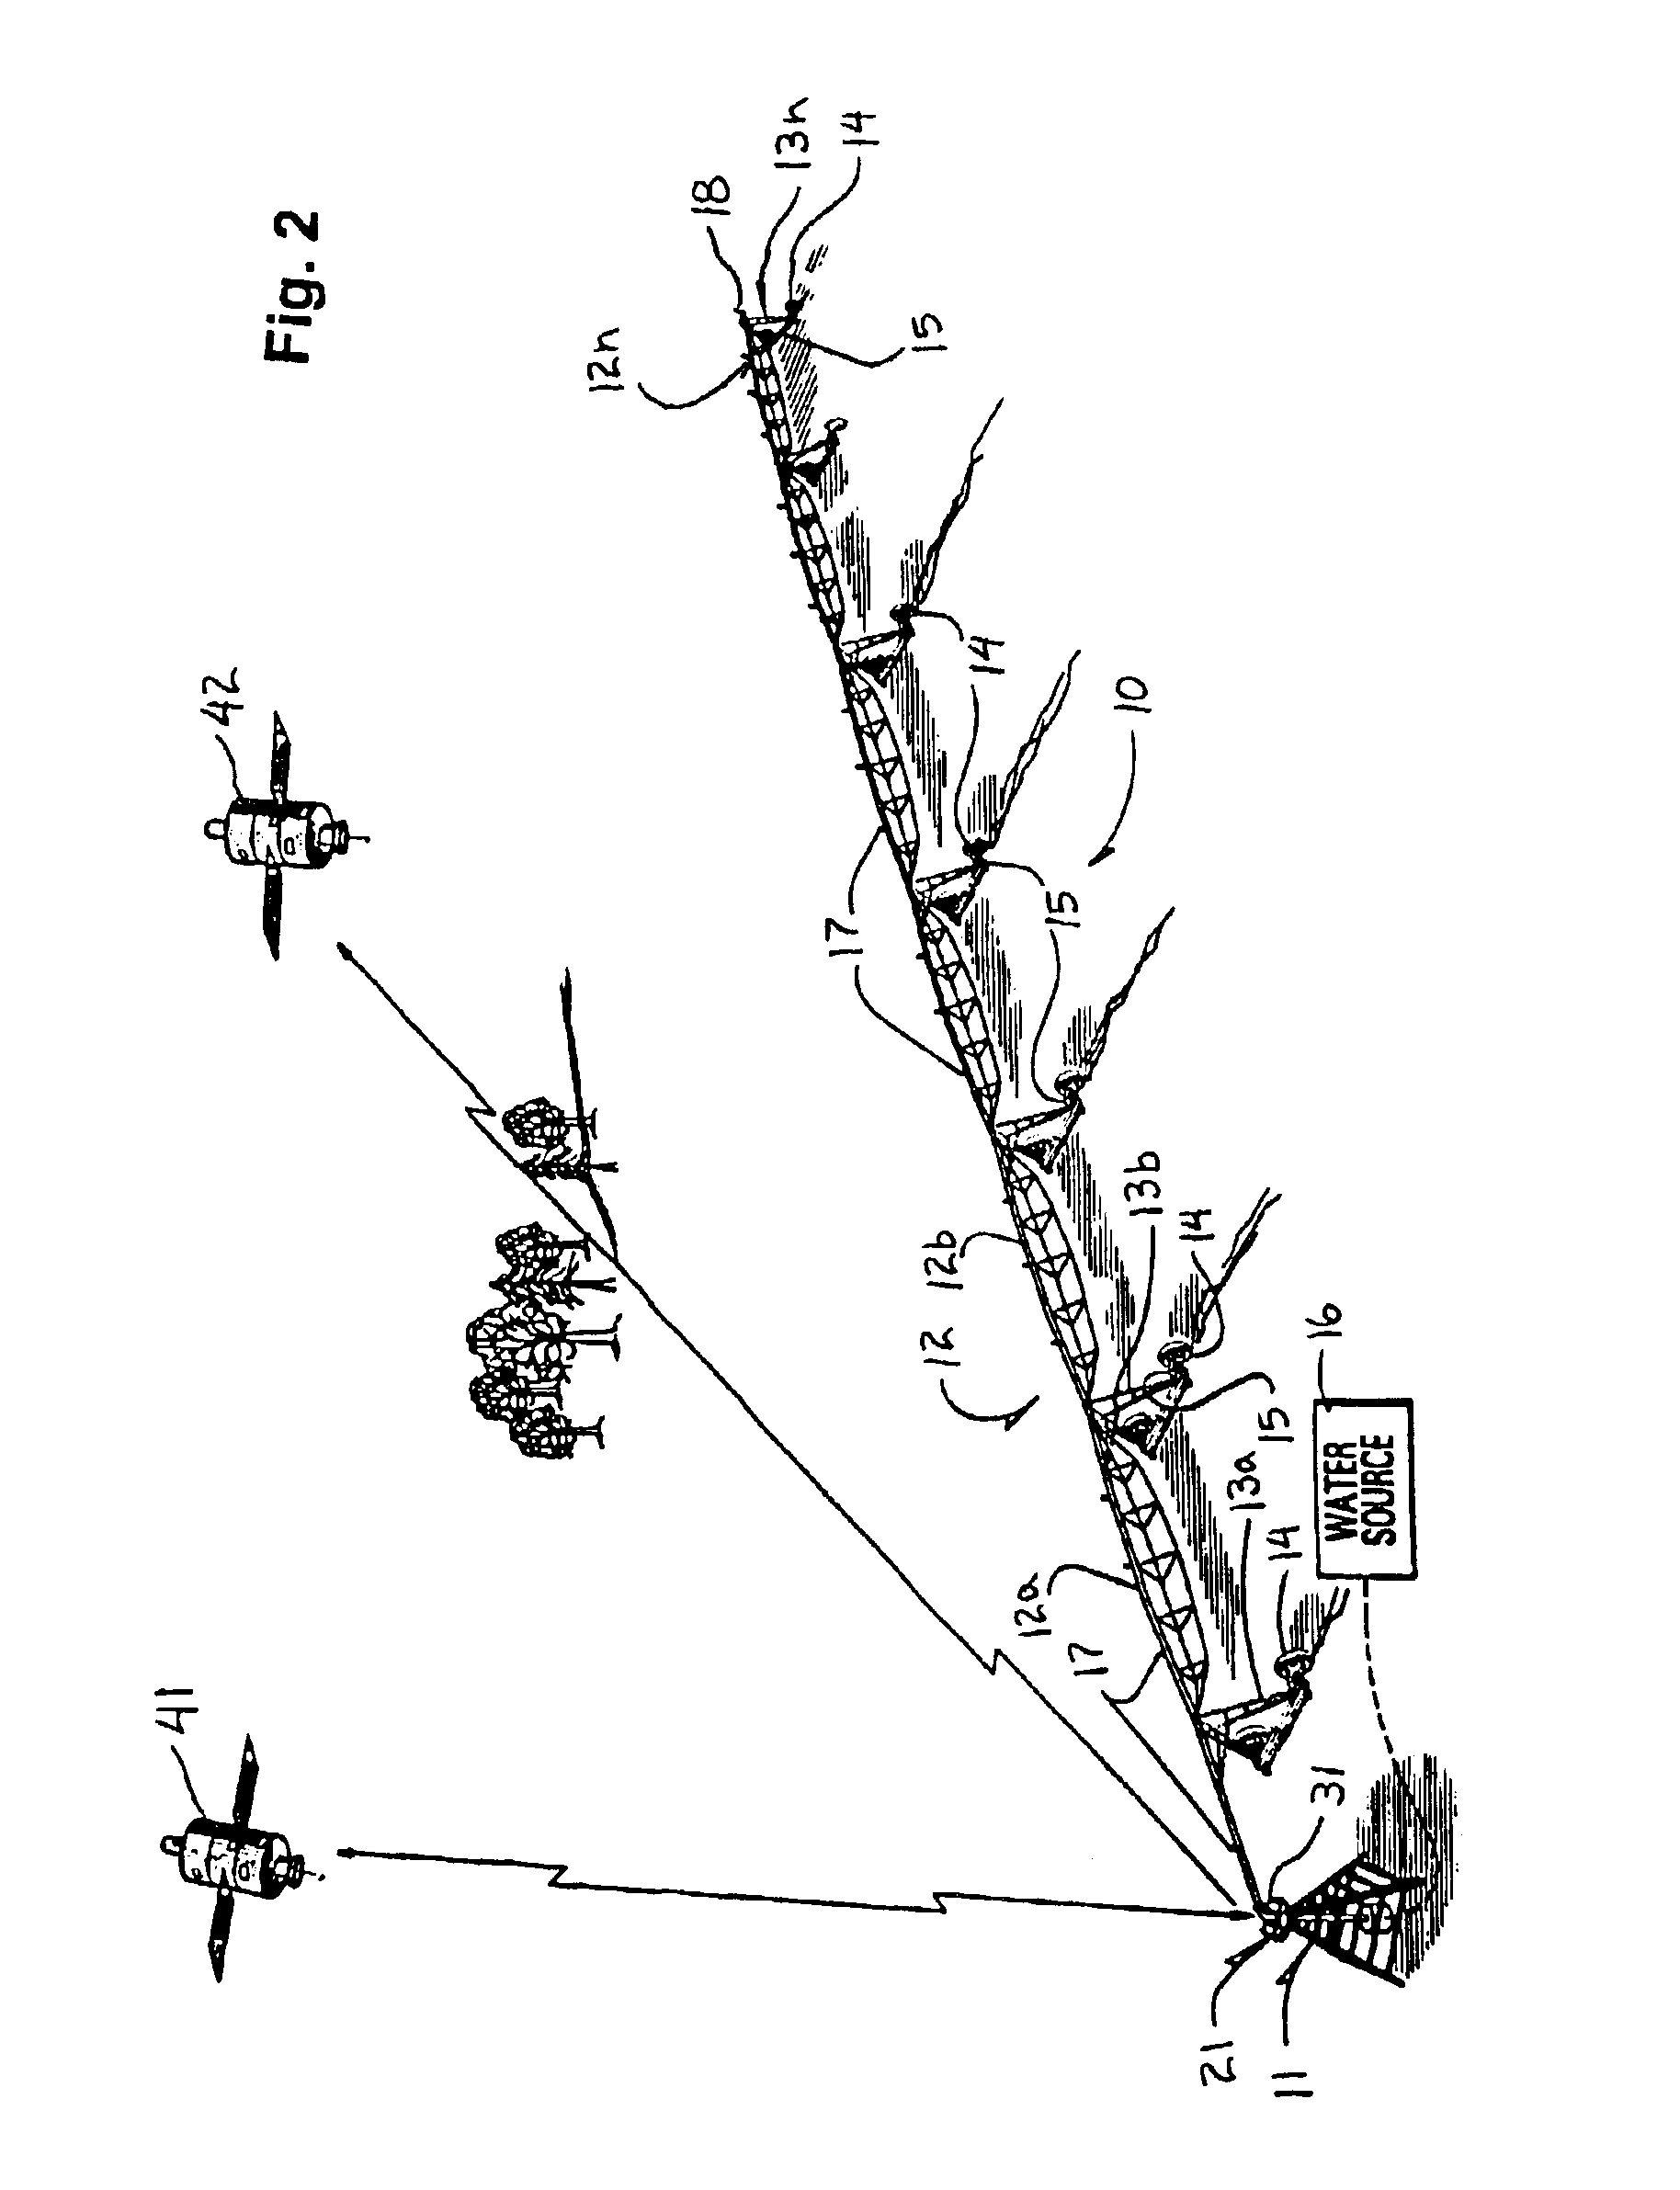 GPS-based control system and method for controlling mechanized irrigation systems